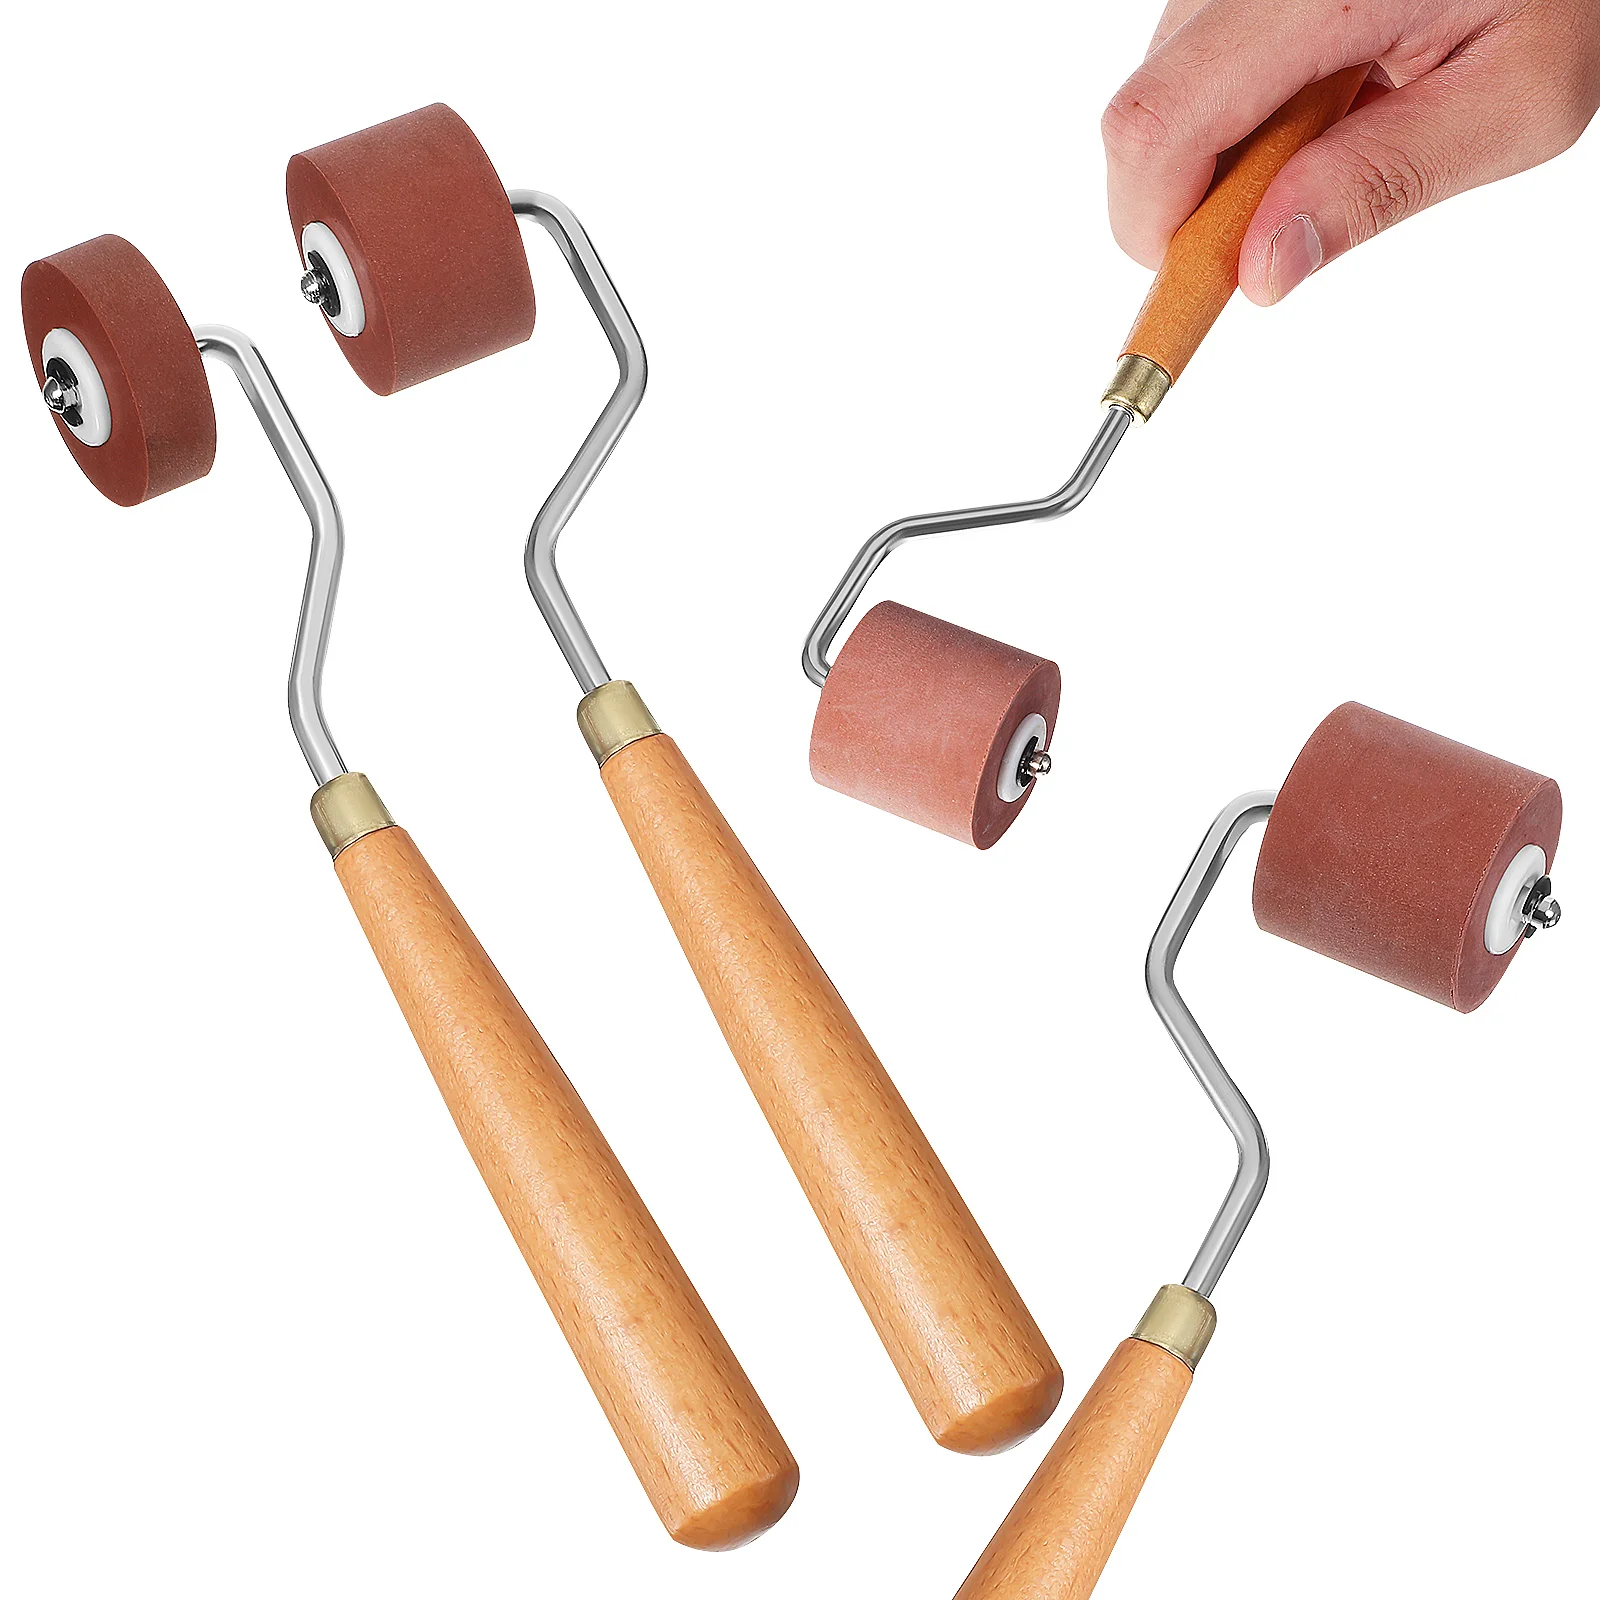 

3pcs Rubber Rollers Paint Brush Printmaking Brayer Rollers Stamping Gluing Tools (1cm, 2cm, 3cm)